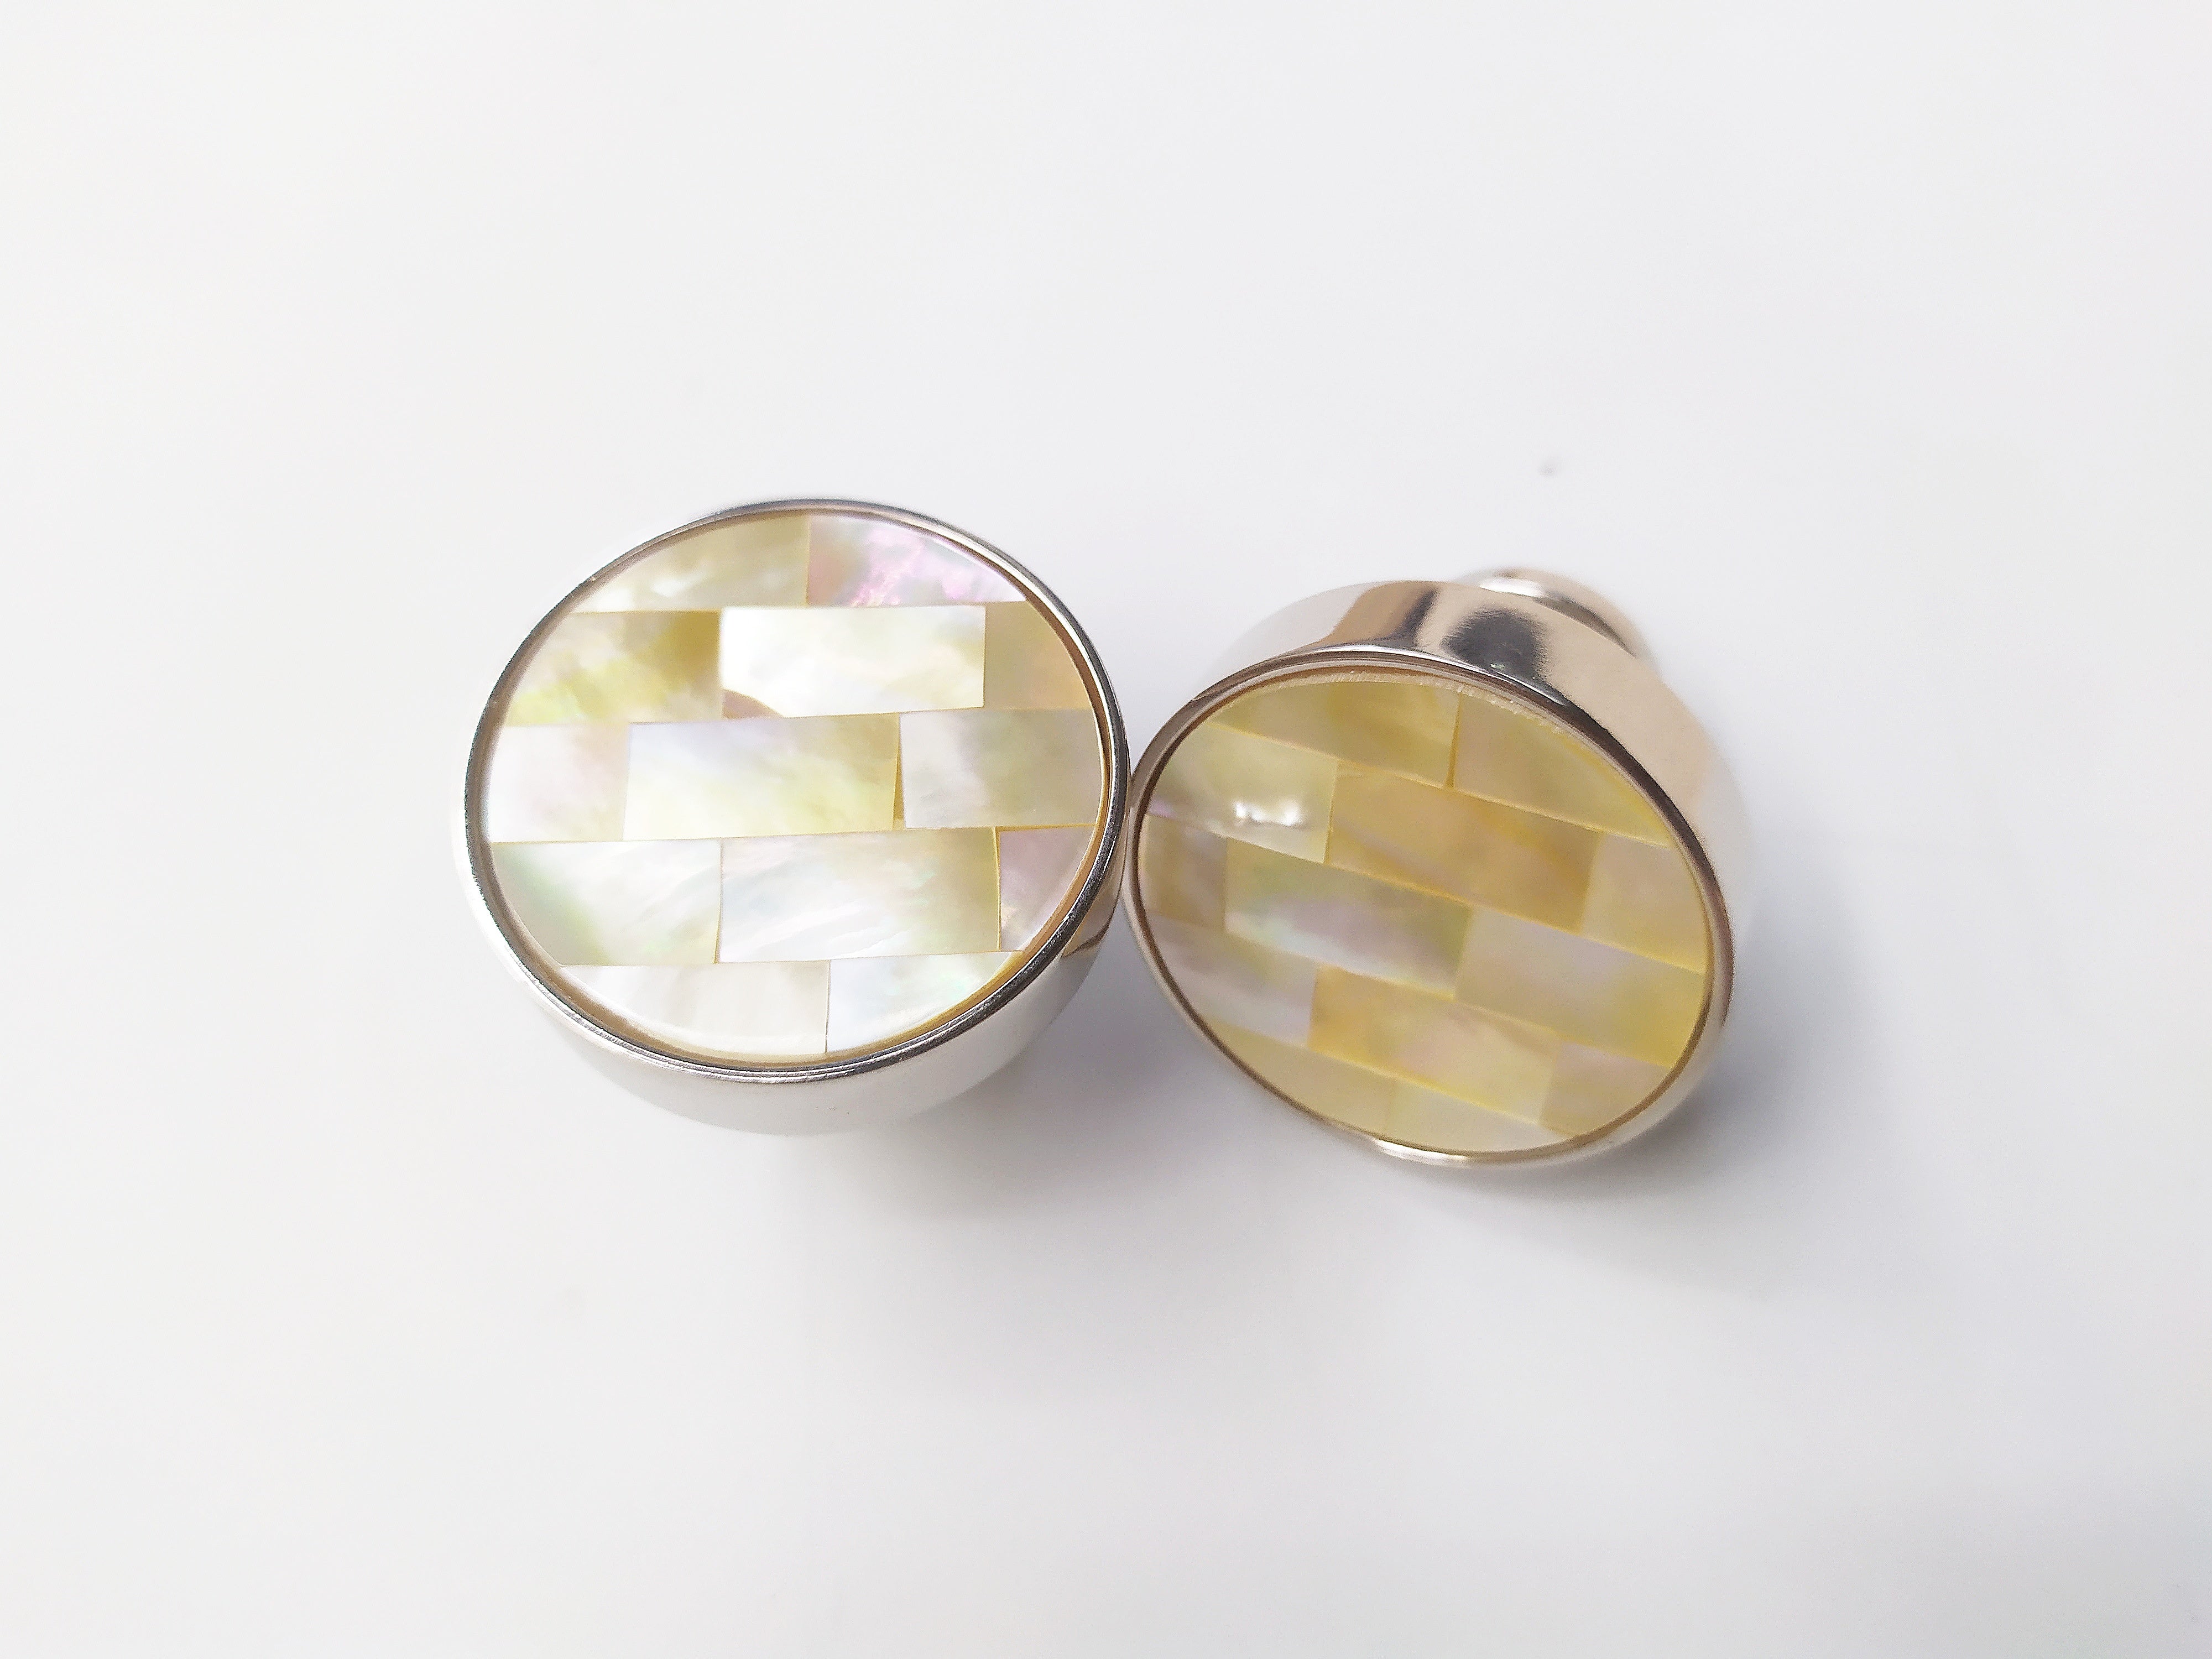 Inlaid yellow mosaic mother of pearl cabinet round knob